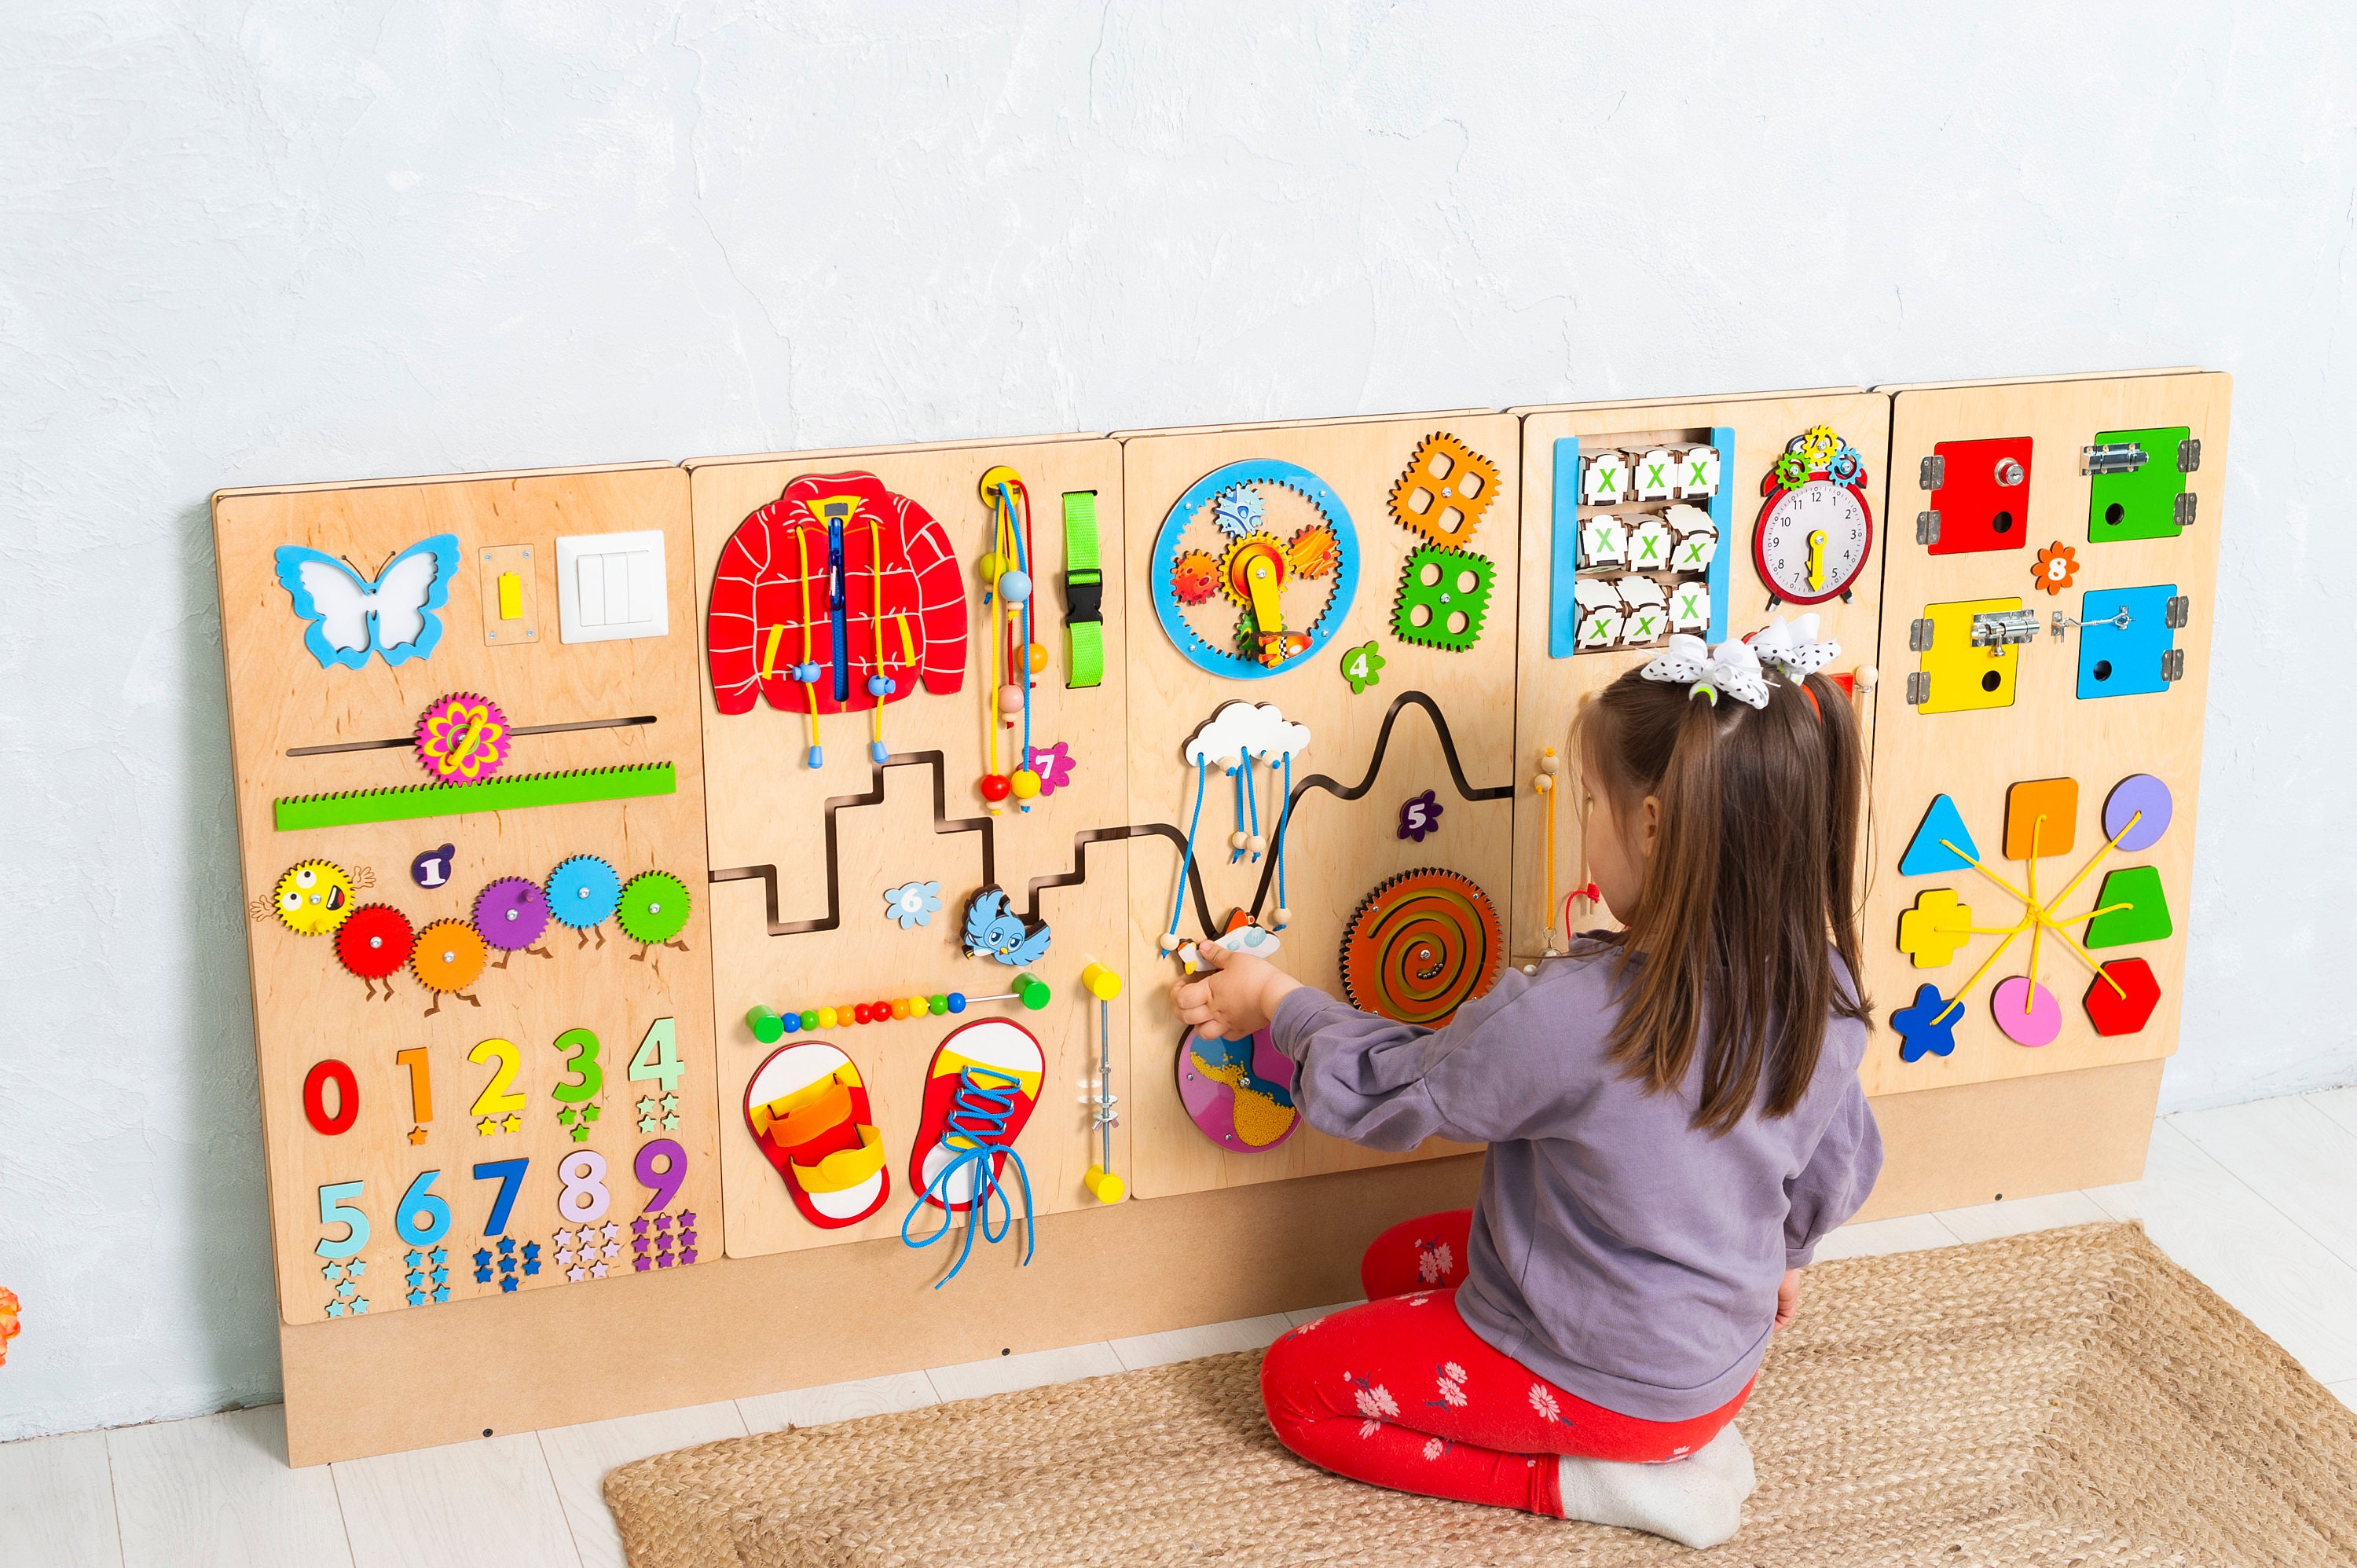 Sensory Solution for Pediatric Waiting Room or Dental Office Tactile Wall  Toddler Busy Board Educational Wall Toy for Kids Playroom -  Sweden